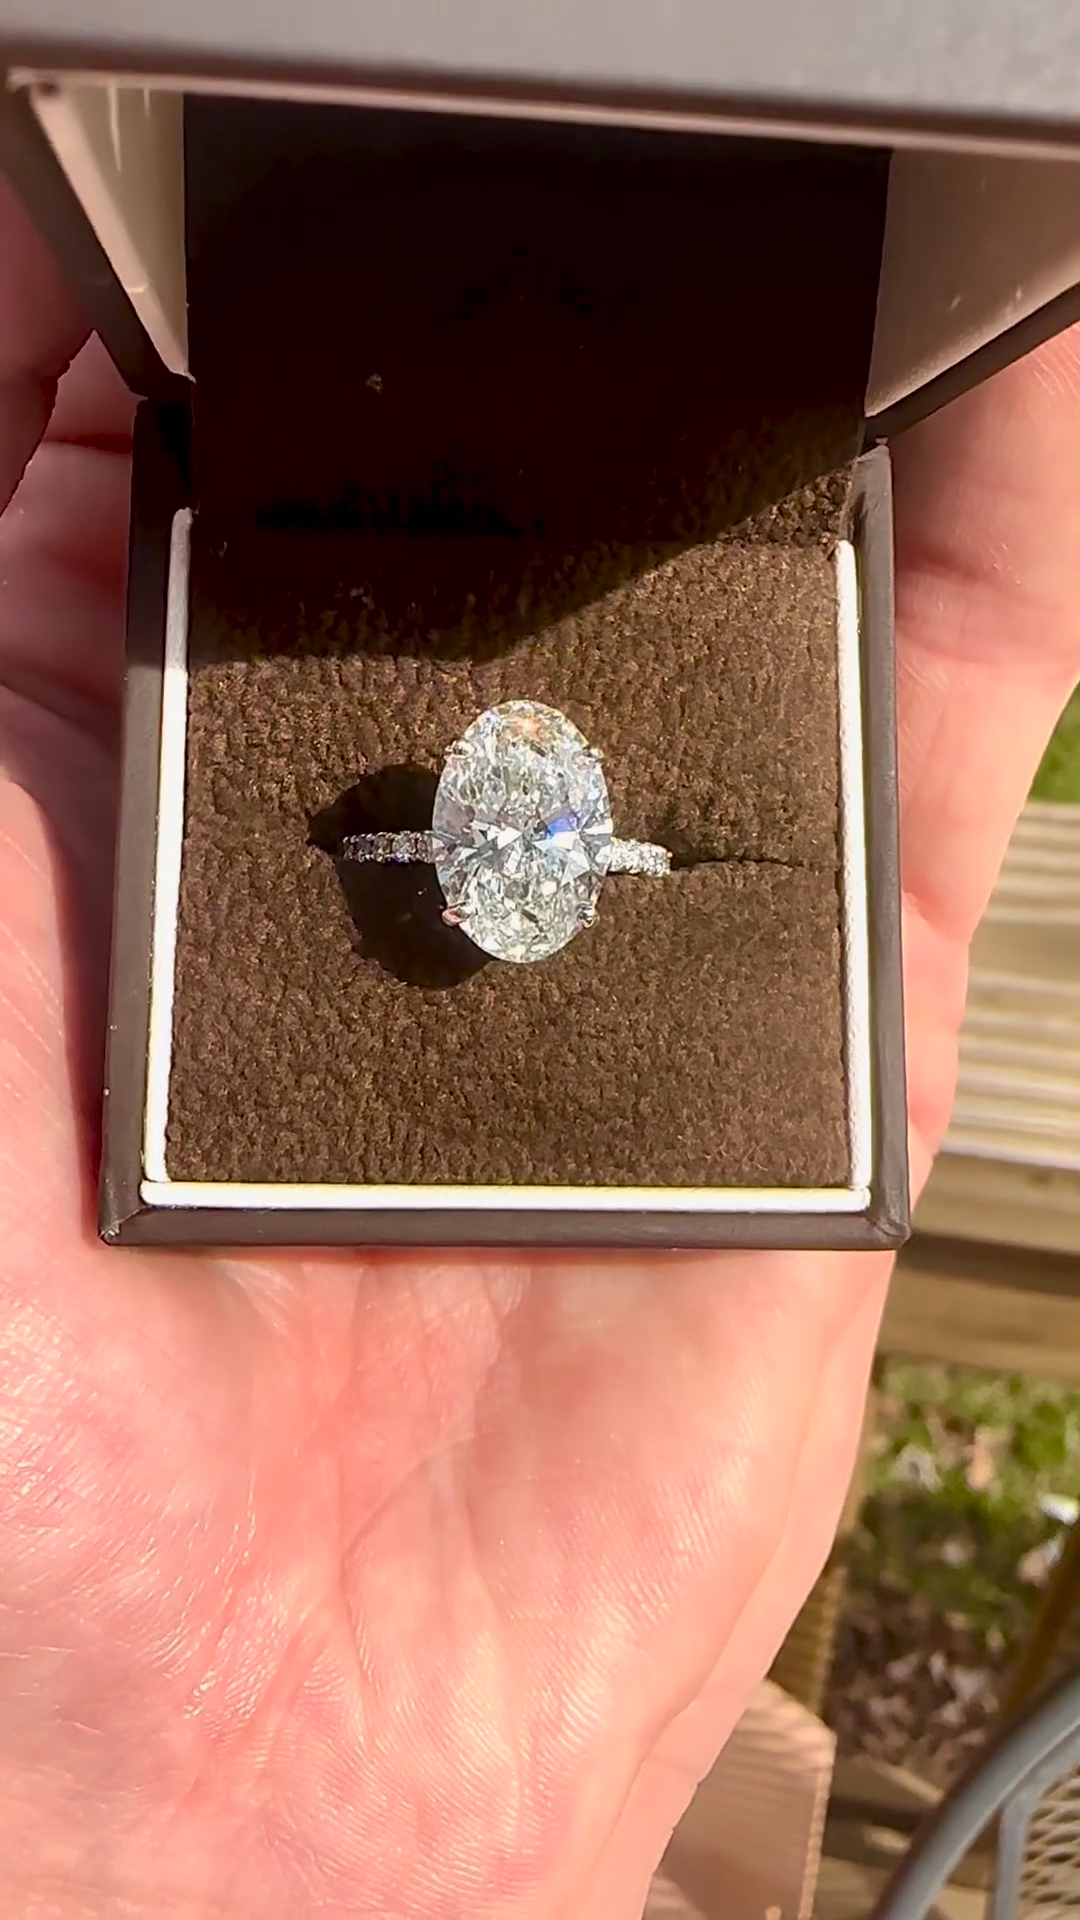 Catelynn shared a video of the stunning ring sparkling in the sunlight on Instagram